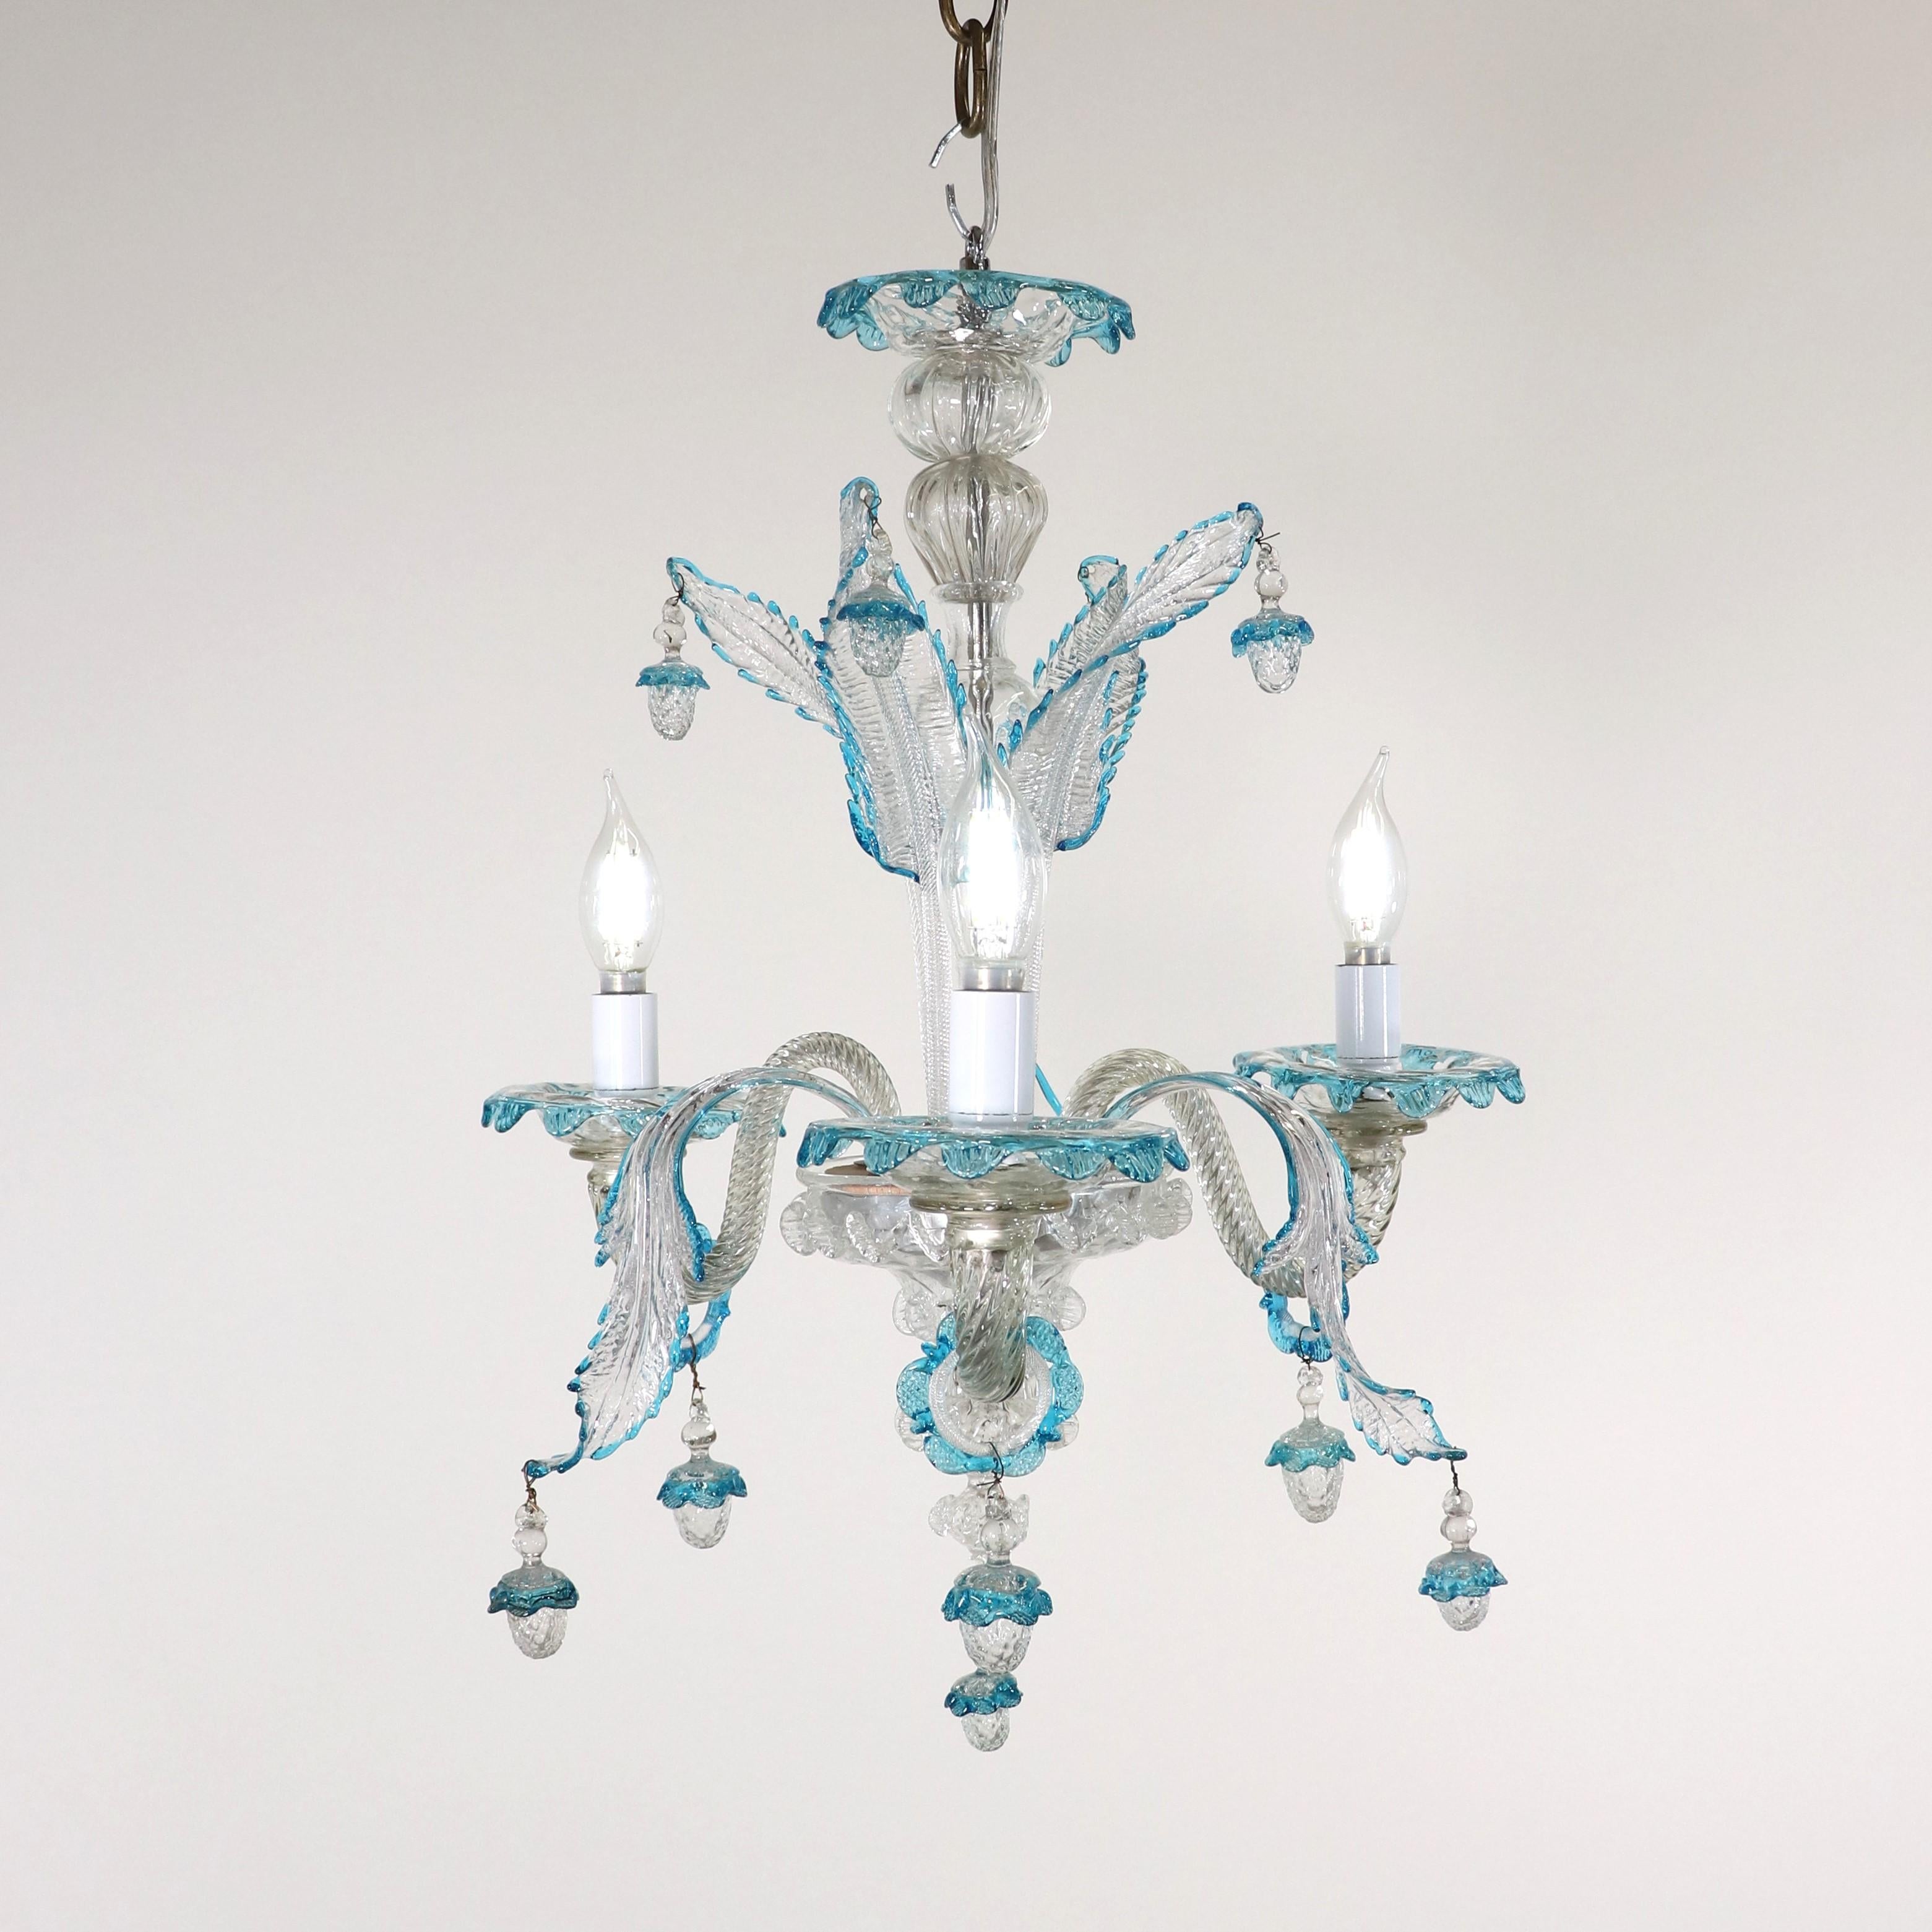 This handcrafted cristallo Murano chandelier has three scroll arms and features a bulbous center column with sprouting natural details, stylized here with leaves and acorn-shaped ornaments. The body and arms of this piece are made of clear,